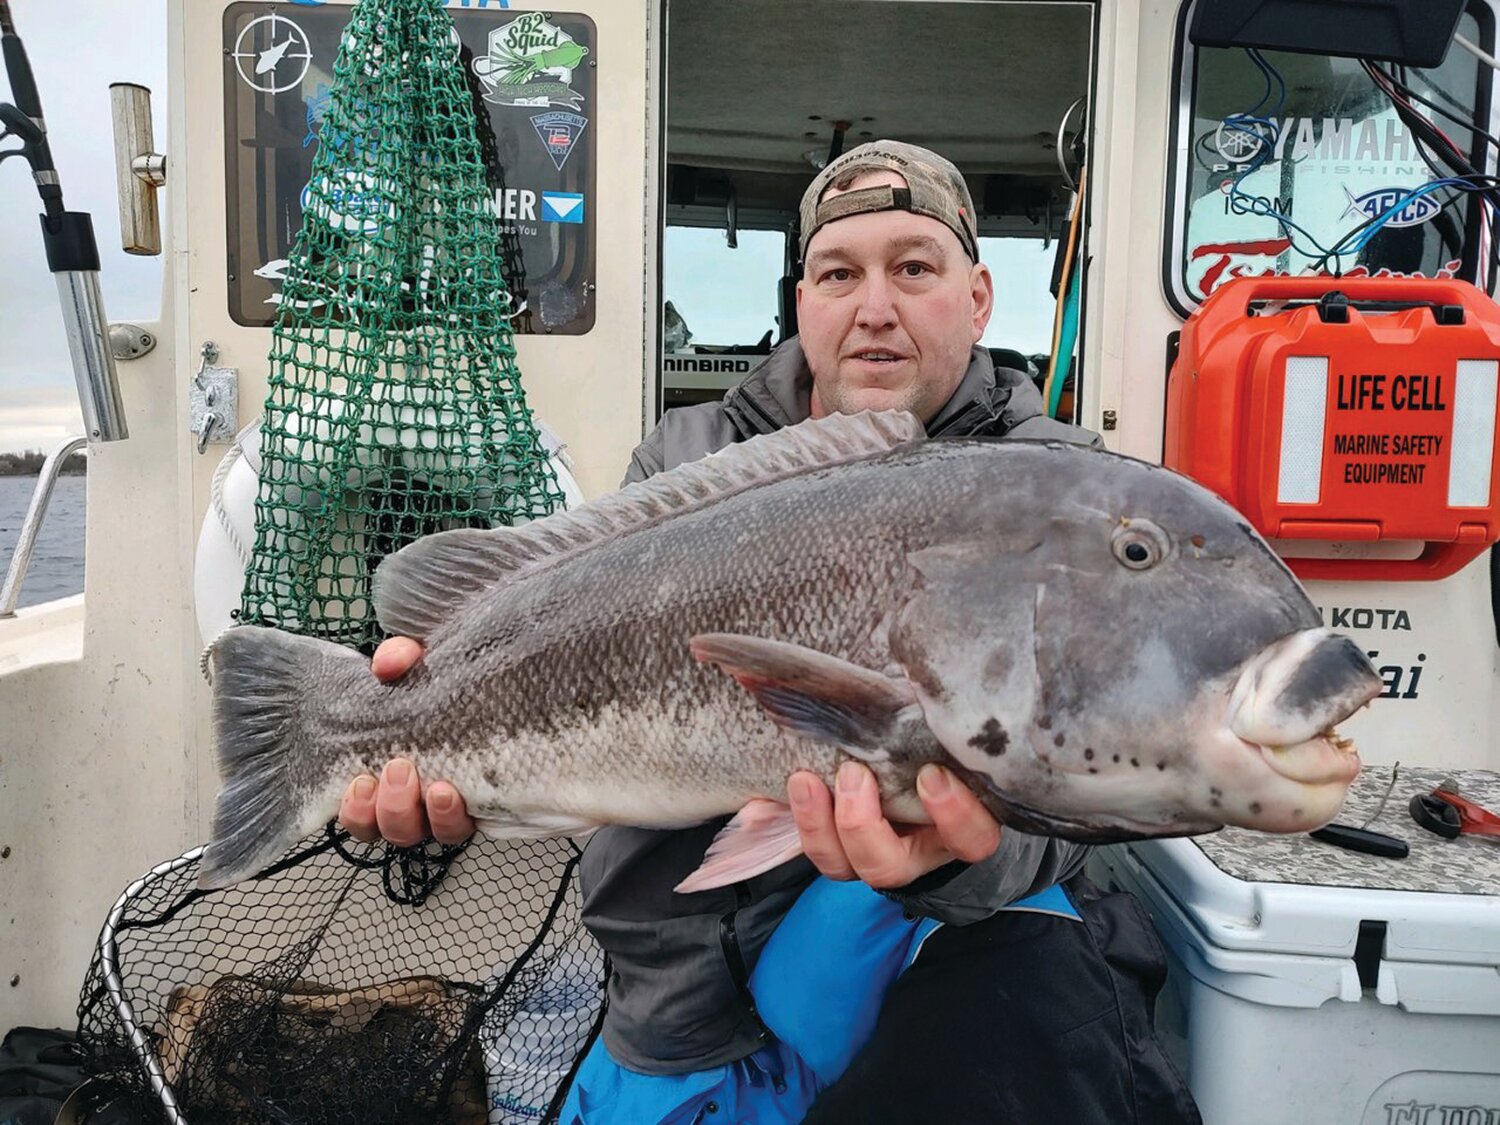 PRIZE TAUTOG: “Al Zuppe with a prize tautog caught this week on Flippin Out Charters, Portsmouth, RI with a green crab and one of Al’s yellow Asylum Jigz.” said Dave Henault of Ocean State Tackle. (Submitted photo)